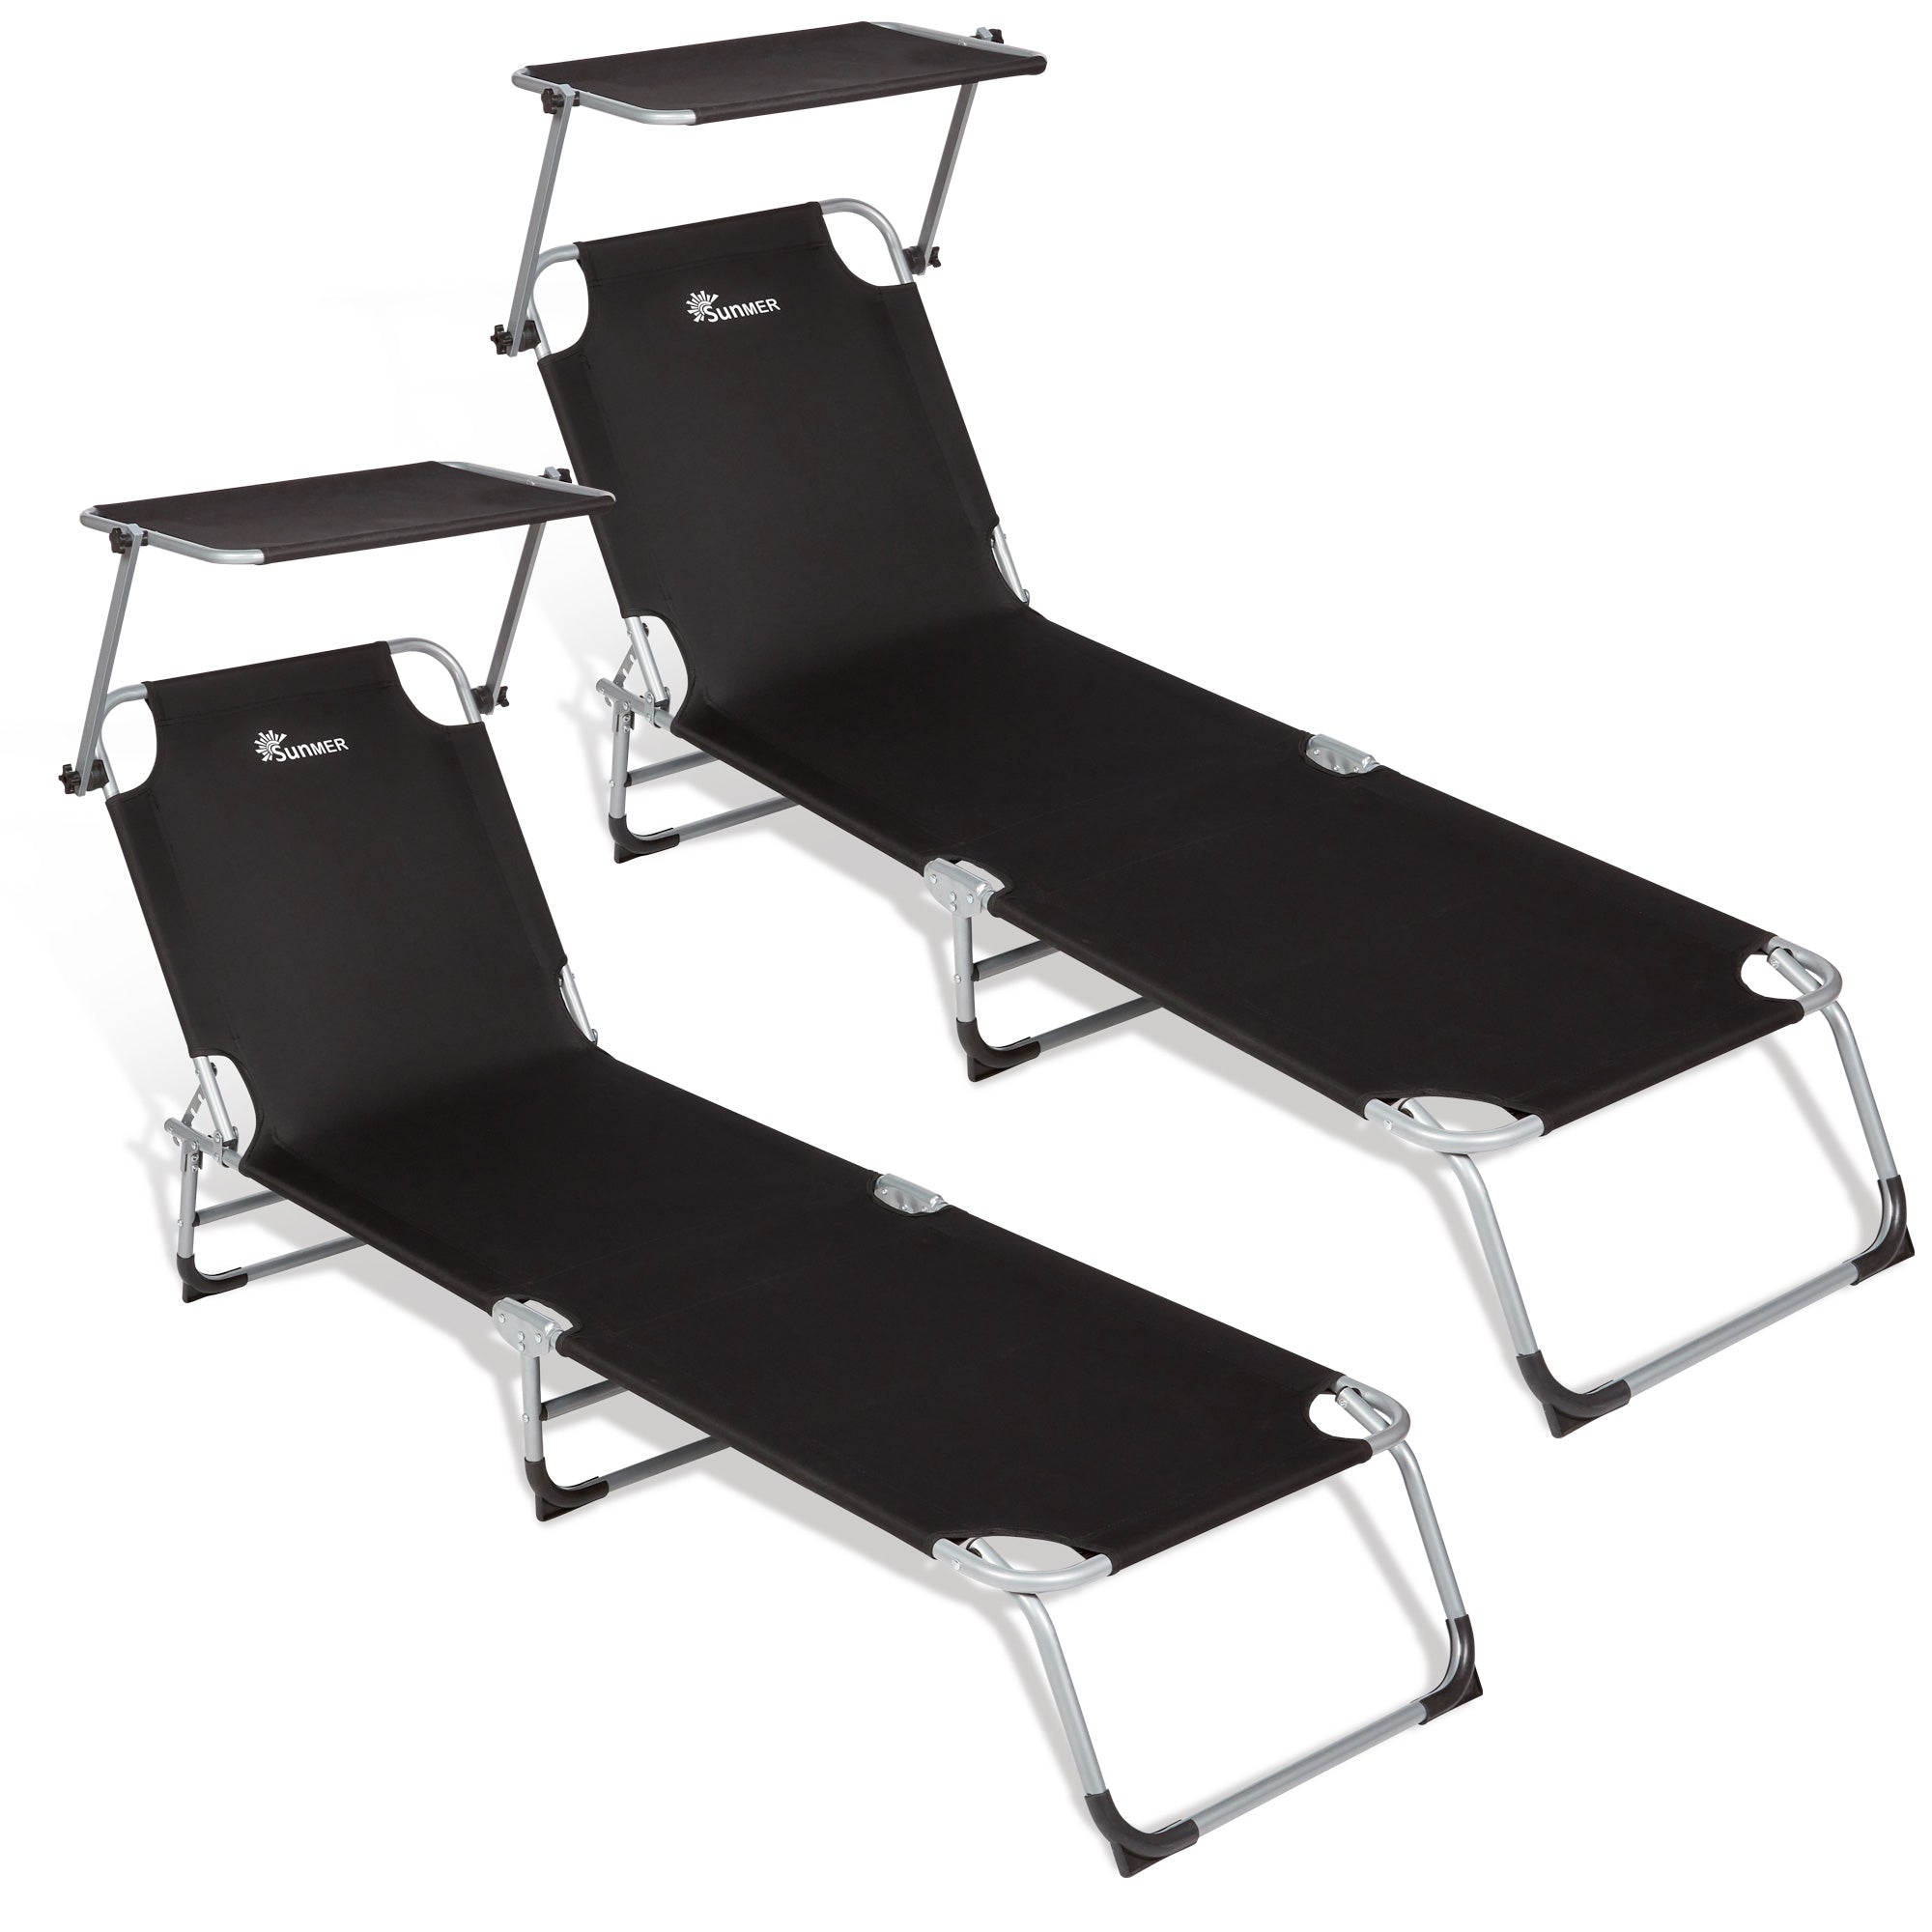 SUNMER Set of 2 Sun Loungers with Adjustable Backrest and Canopy - Black